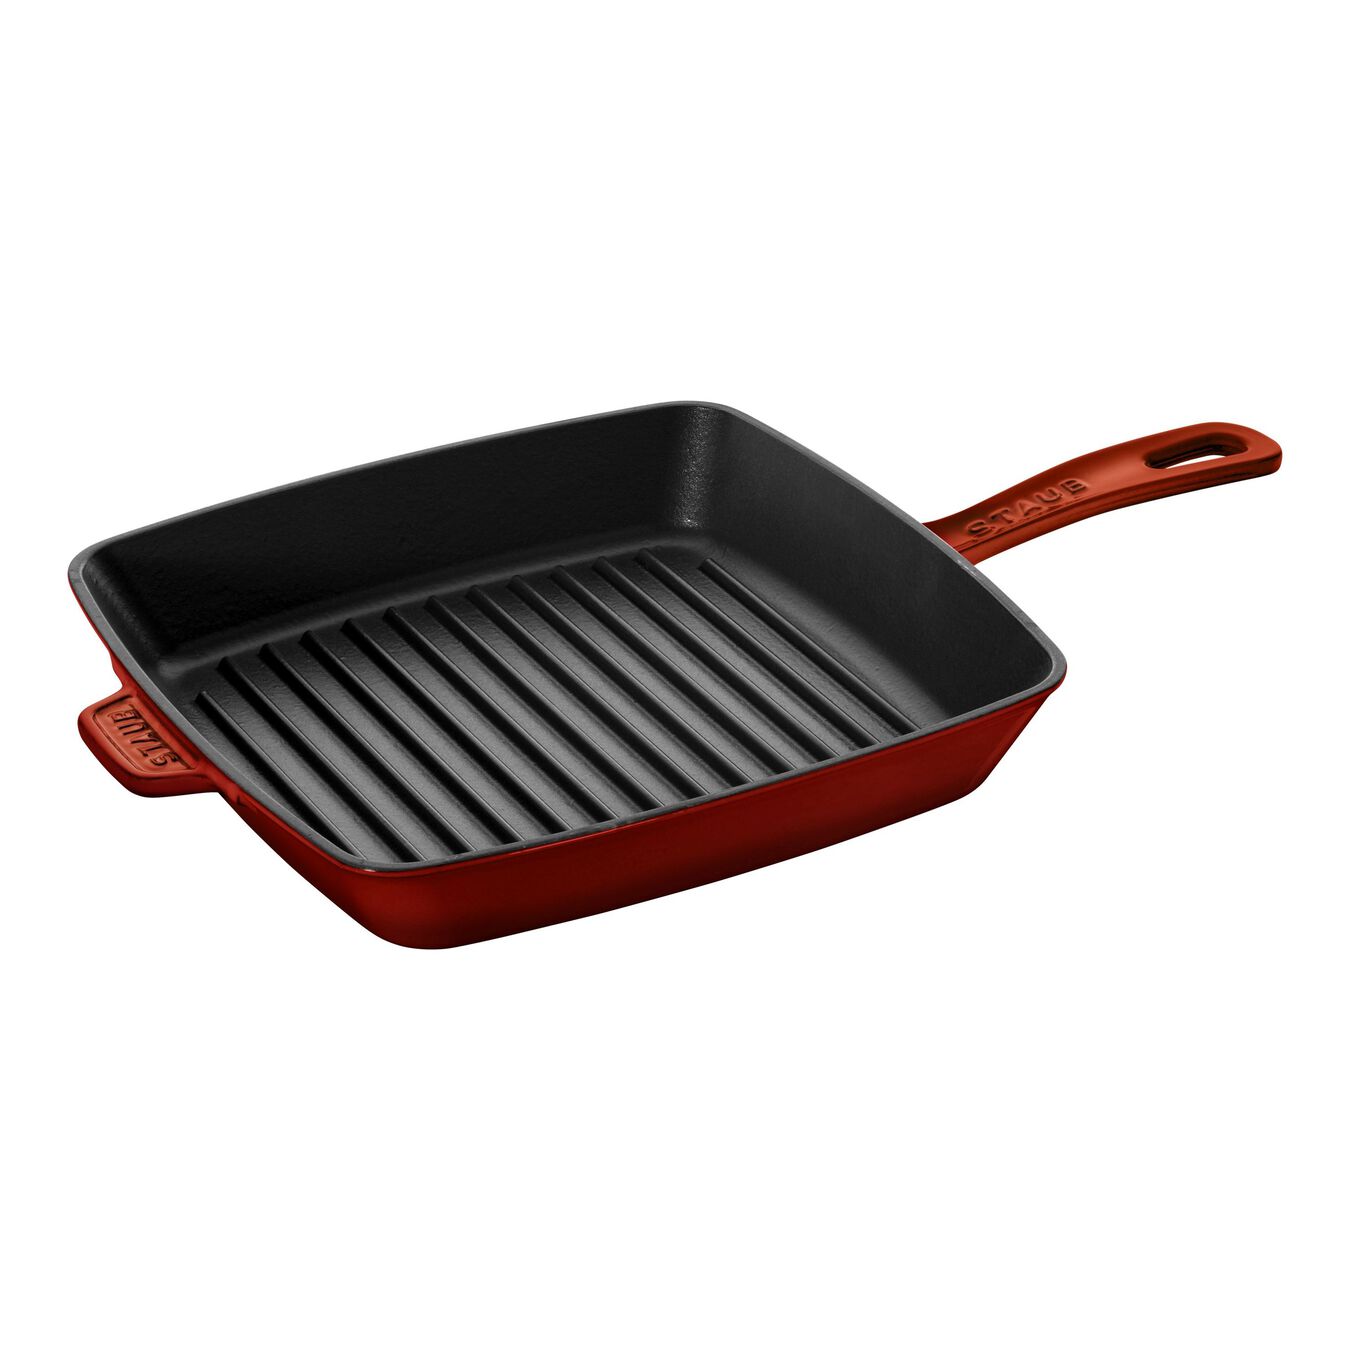 30 cm cast iron square American grill, grenadine-red - Visual Imperfections,,large 1